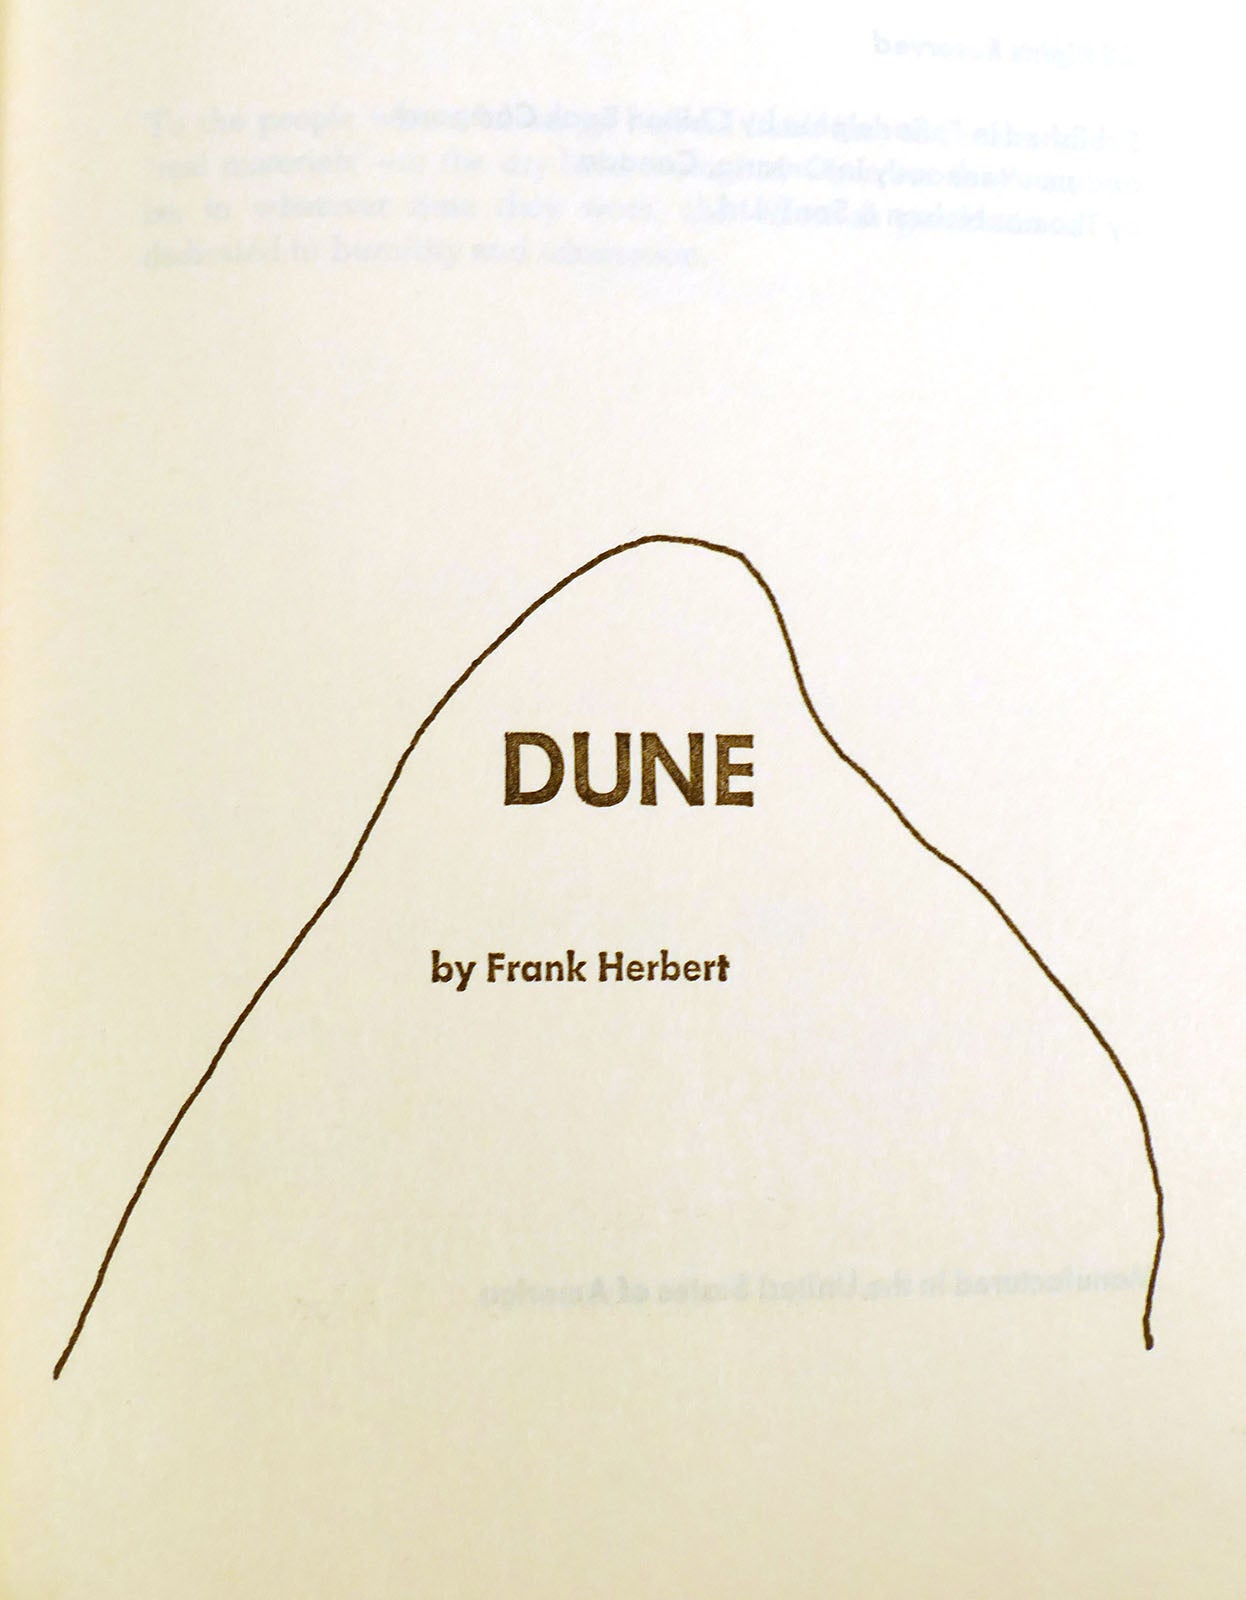 DUNE, Frank Herbert, COLLECTIBLE 1965 1st Book Club Edition red Boards,  Very Good/near Fine Hardcover/brodart-protected Dust Jacket 